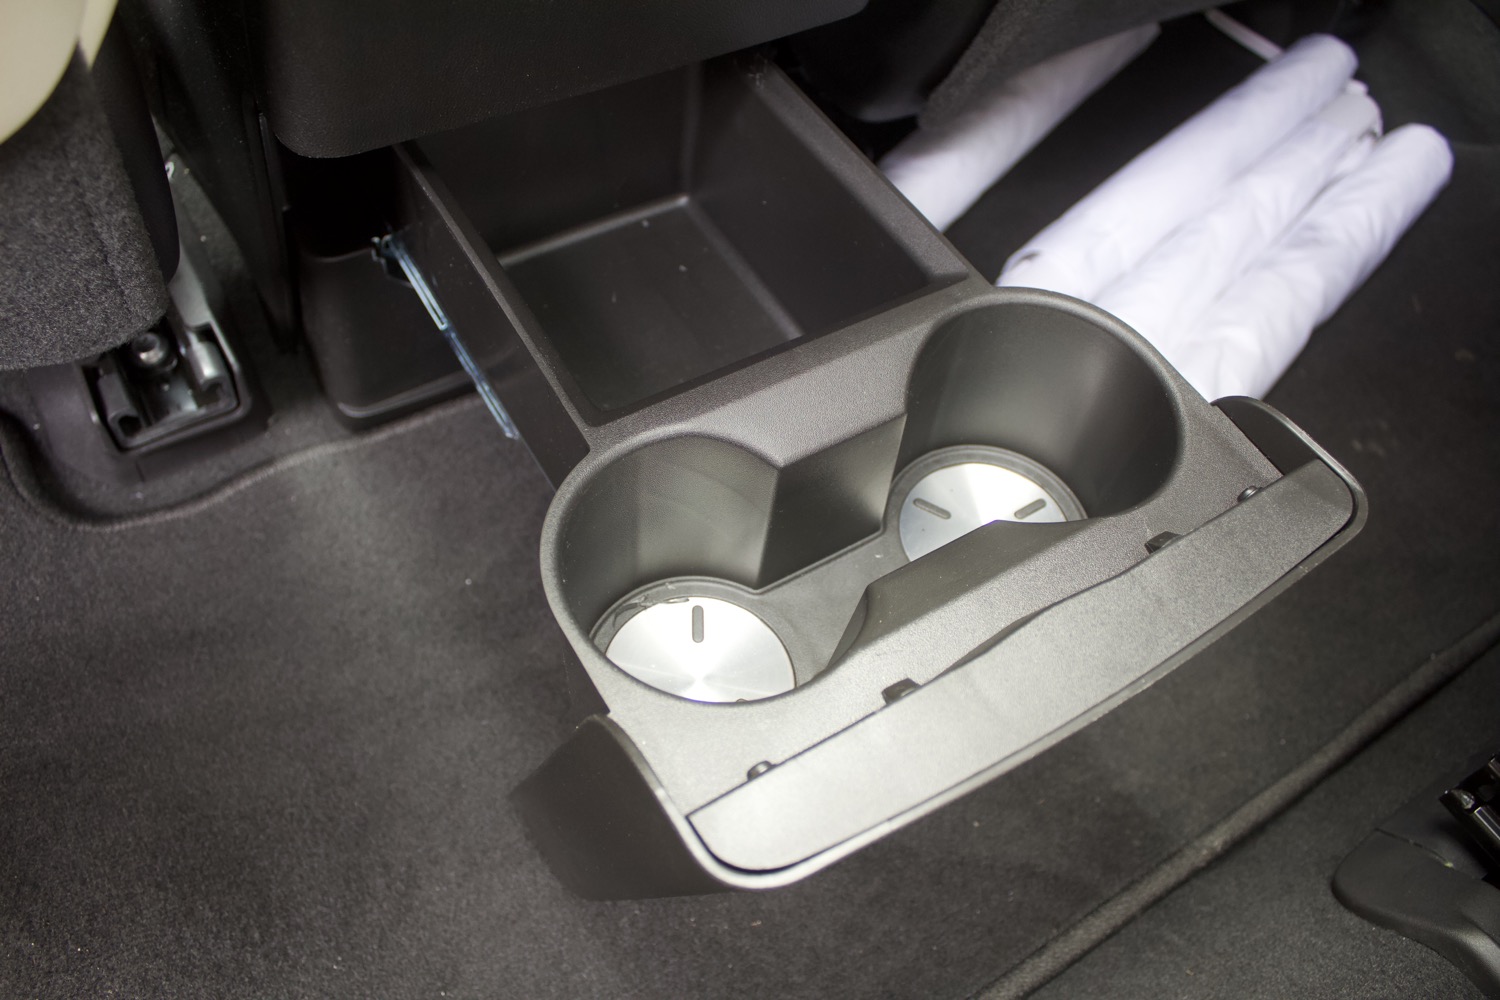 Get a Cupholder for Your Aisle Seat - CBS News